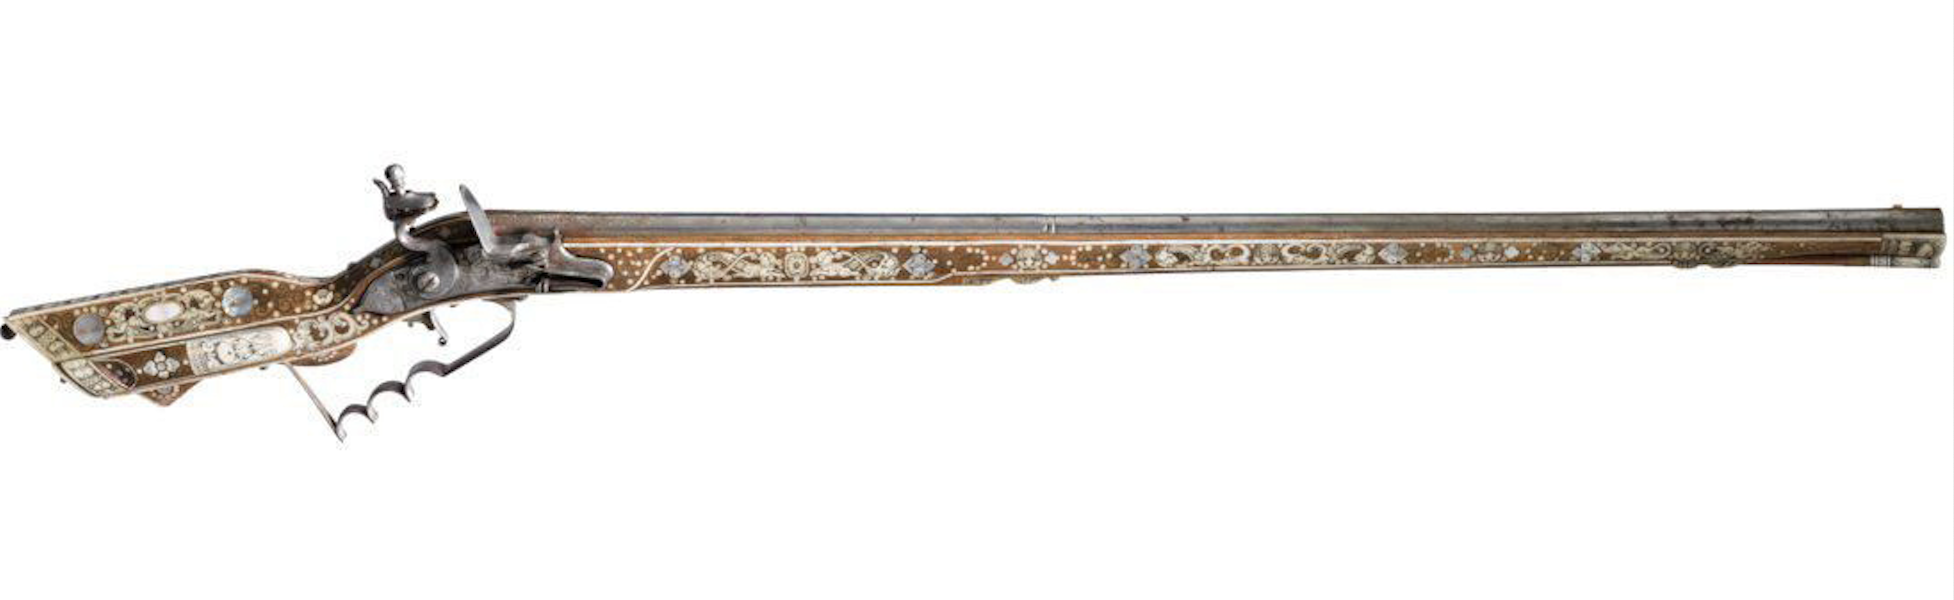 Teschen flintlock rifle, estimated at €4,500-€9,000. Image courtesy of Hermann Historica and LiveAuctioneers